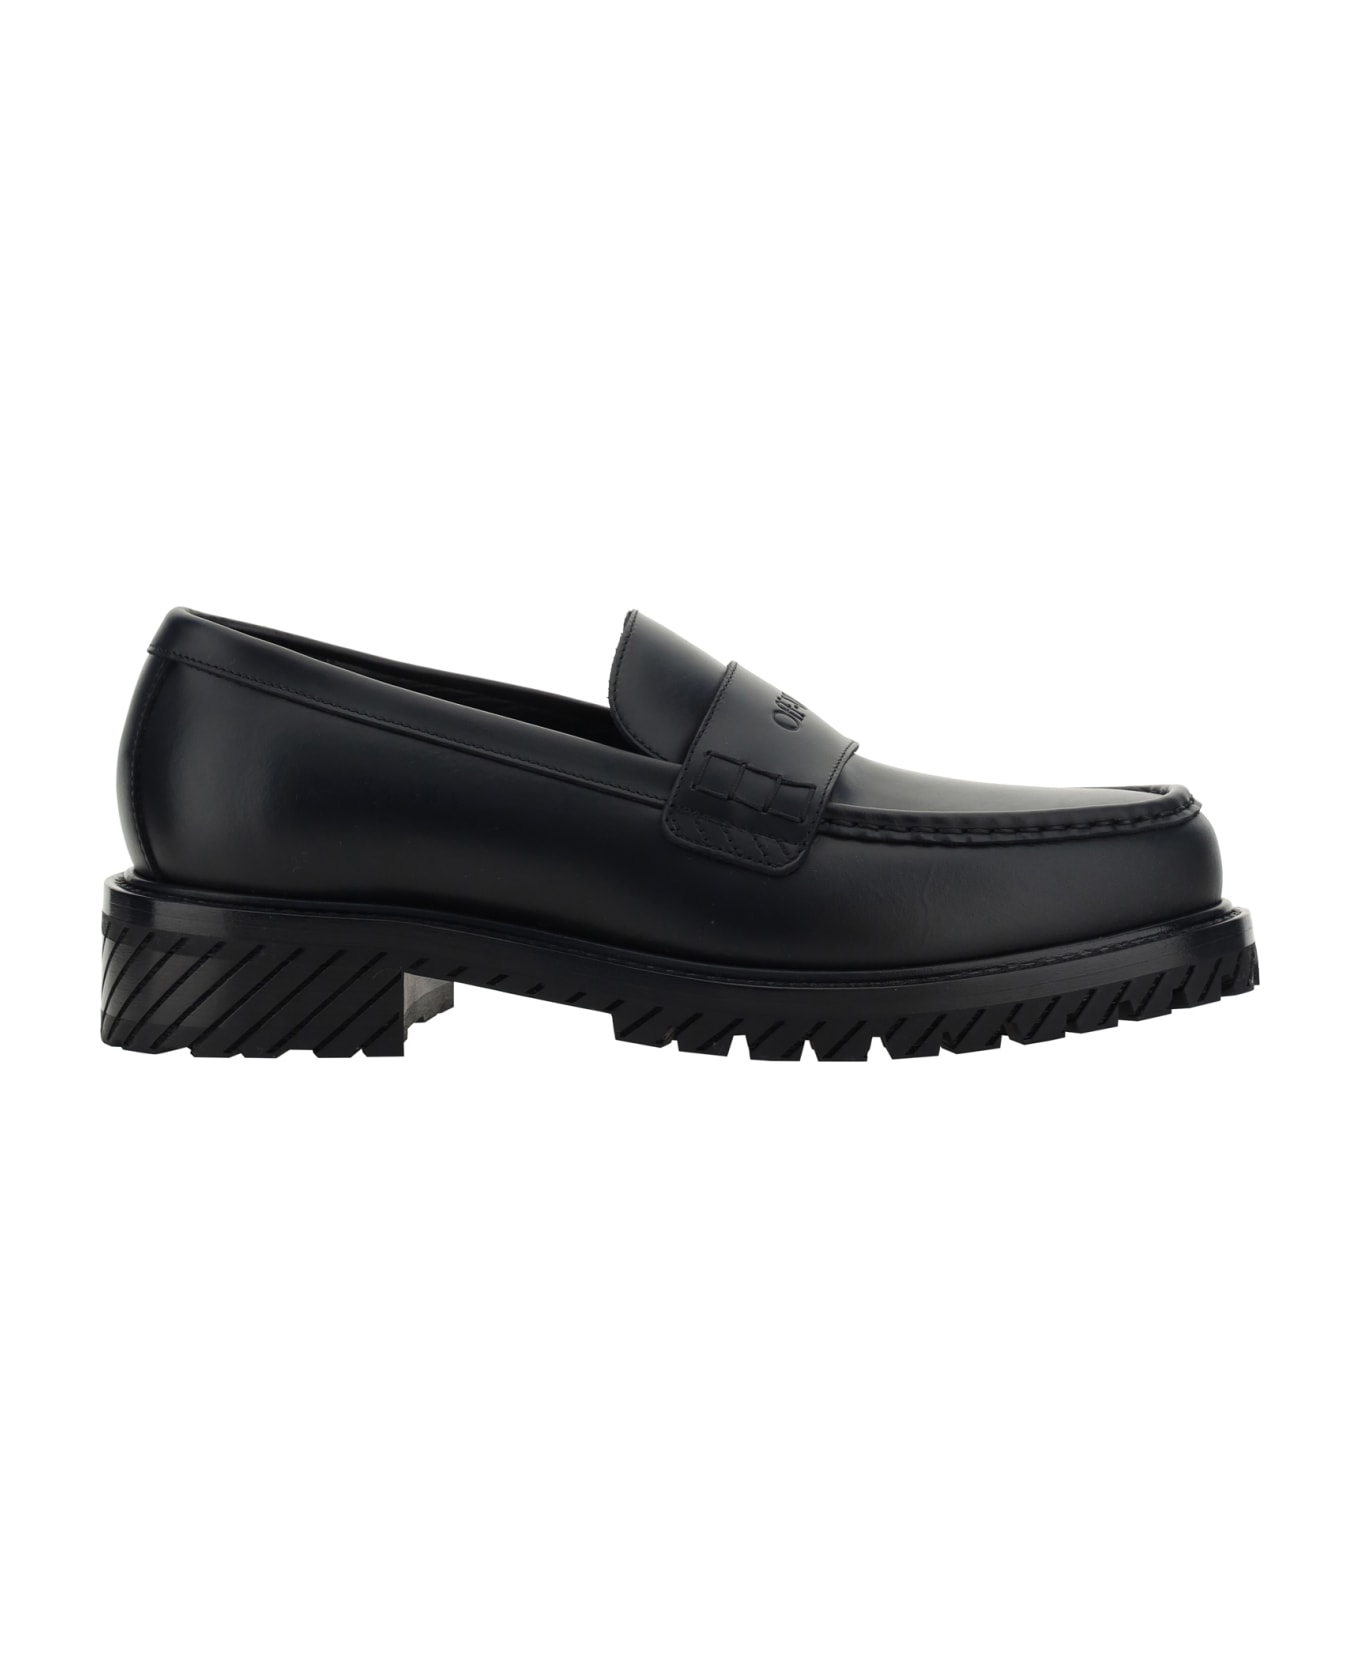 Off-White Military Leather Loafers - Black Black ローファー＆デッキシューズ